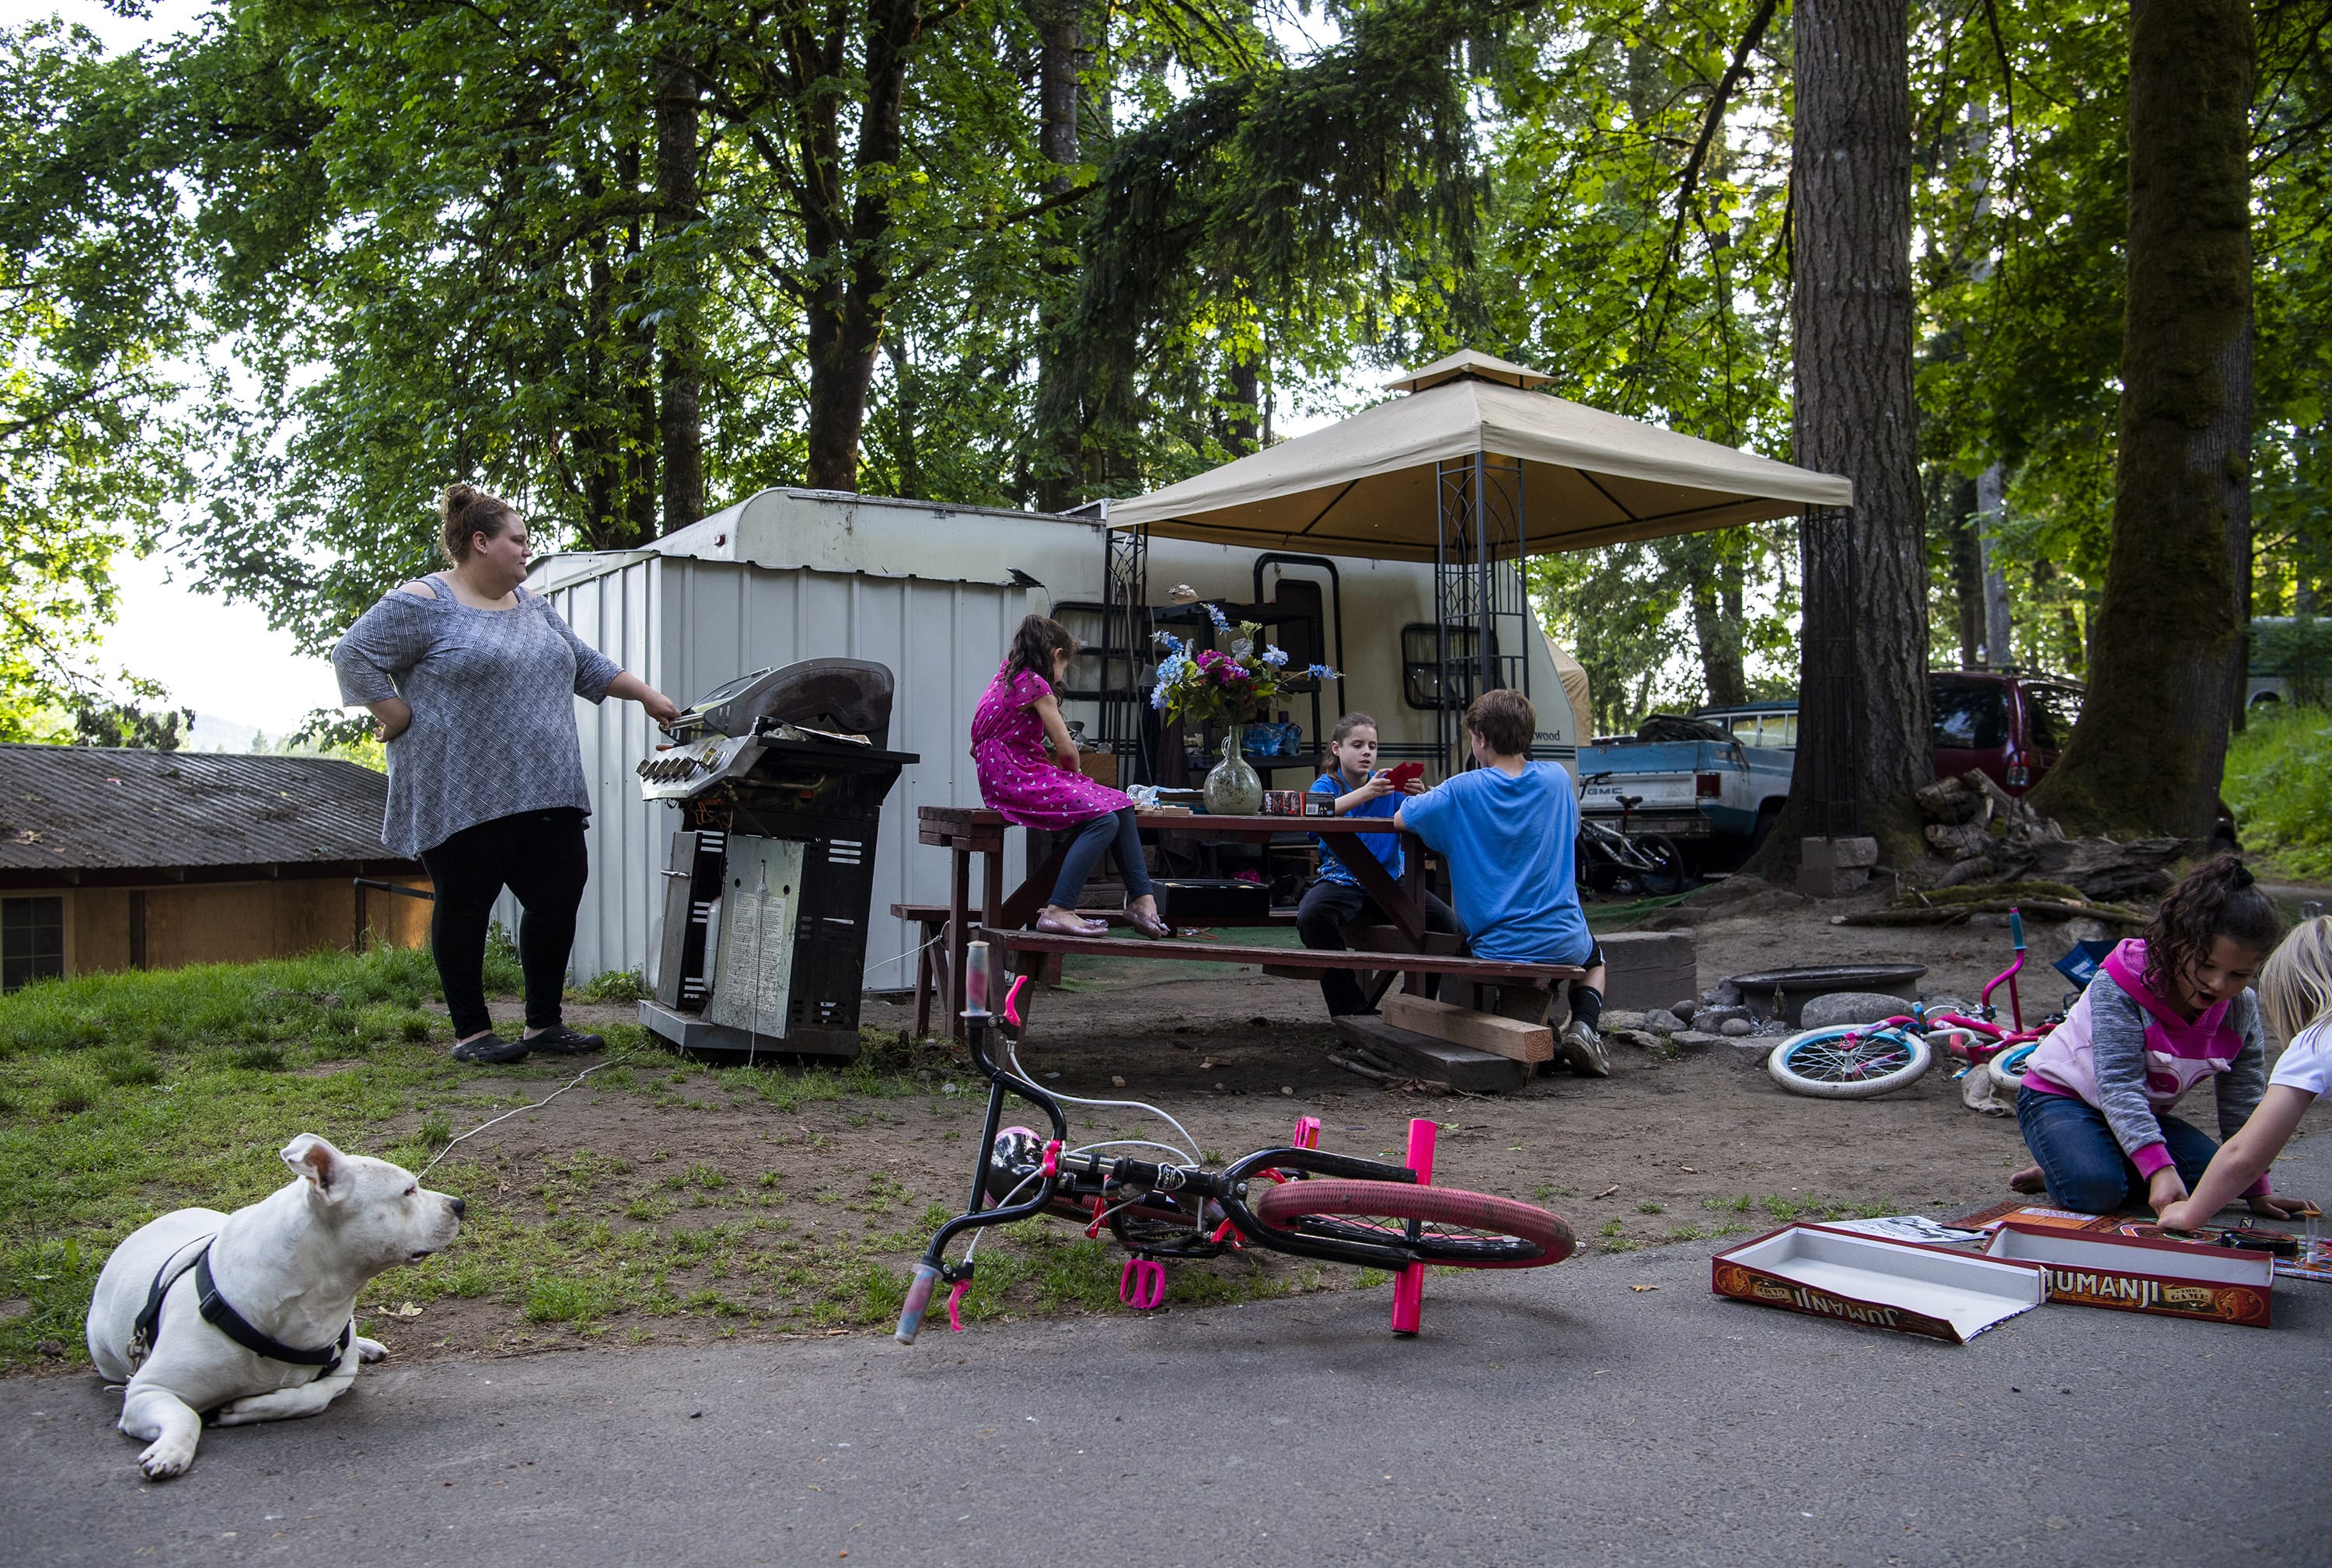 Valerie Guerra, left, barbecues meat and vegetables for her kids outside their RV at the Lewis River RV Park in Woodland on May 29, 2019. A few years ago Valerie’s husband was injured at work and Valerie lost her job. At the same time, they also received a 20-day notice to vacate their rental. After being unsheltered and hotel hopping, the family decided to stay in an RV. Valerie and her husband are both working again and the family is hoping to find housing by the end of the year.